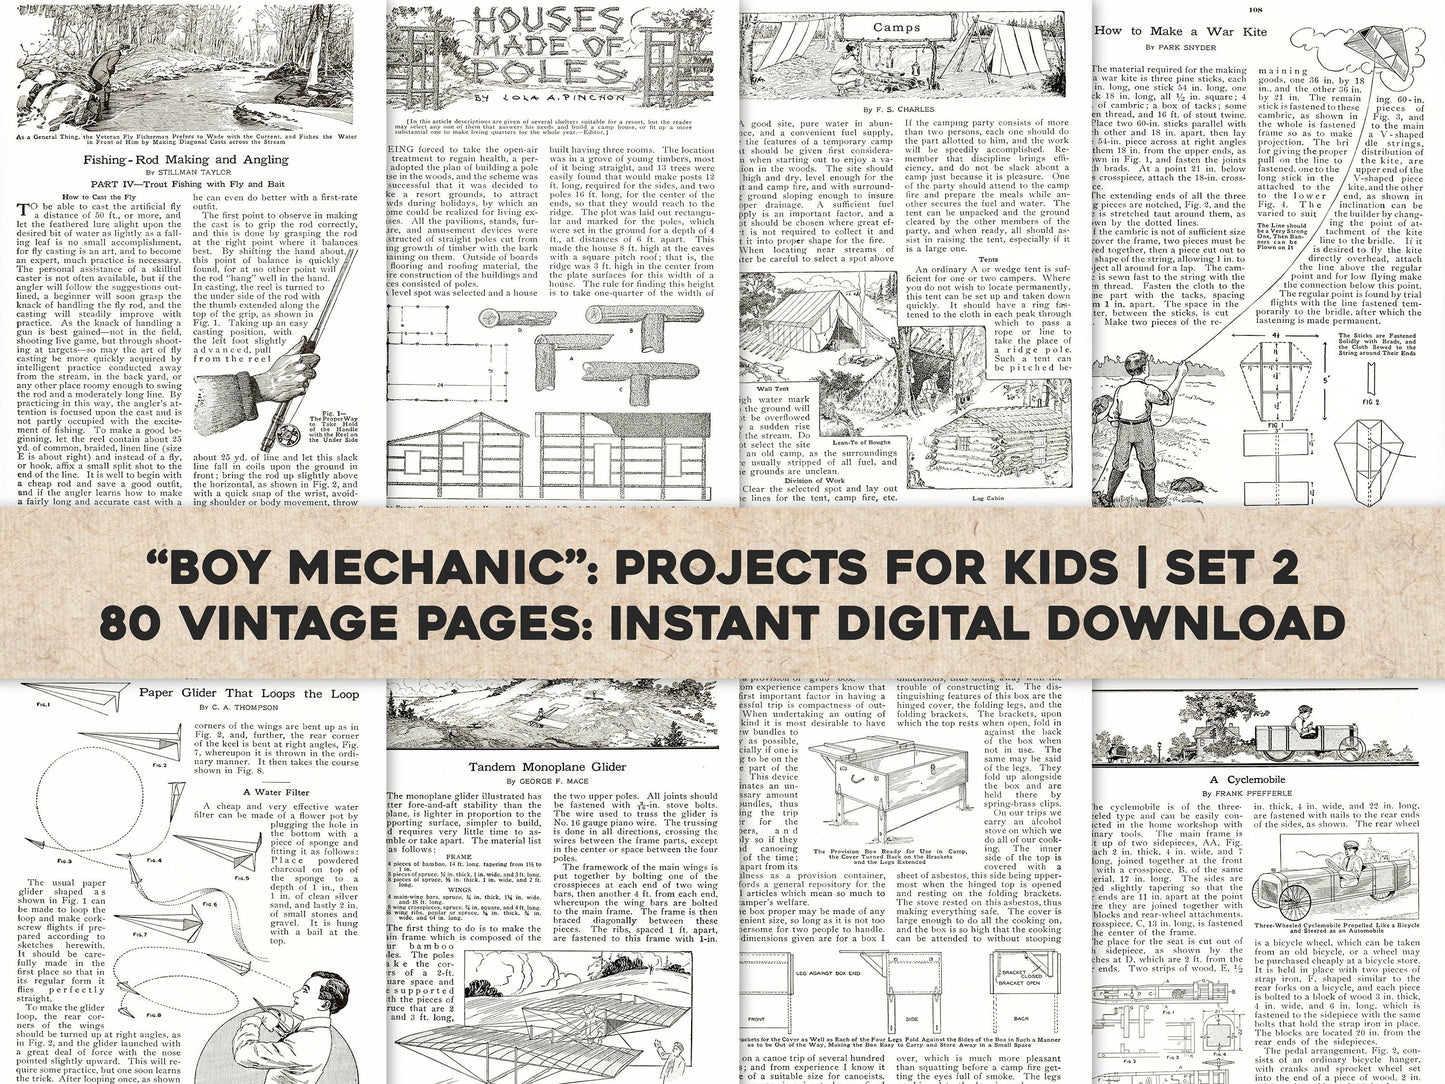 The Boy Mechanic 1000 Things for Boys to do Set 2 [80 Images]